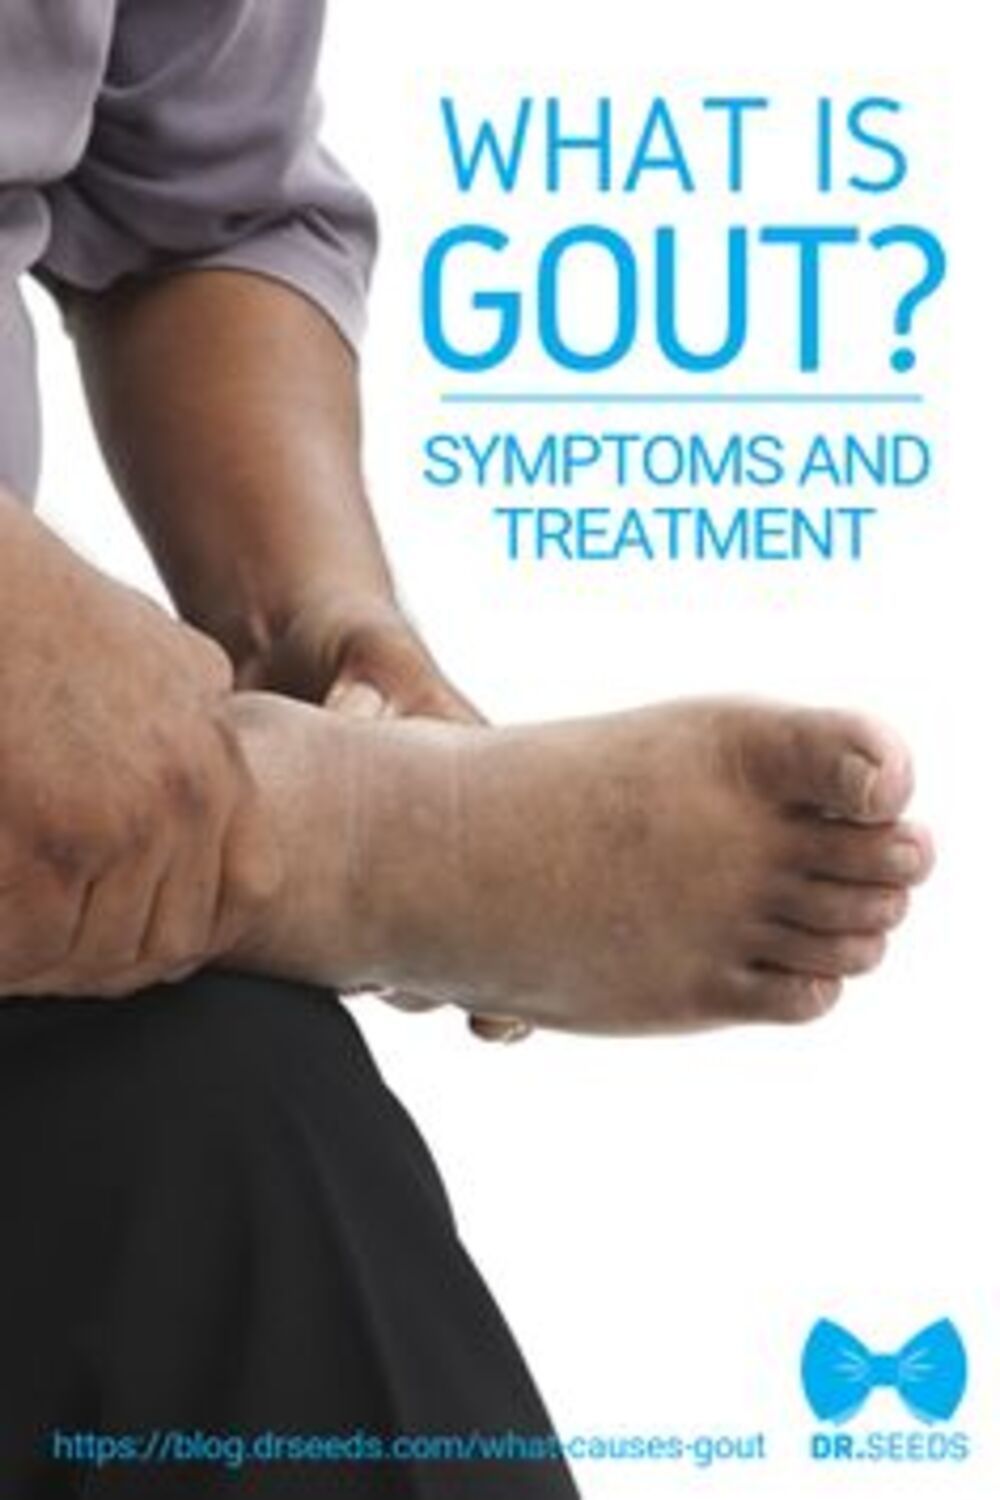 Pin on Treatment for Gout